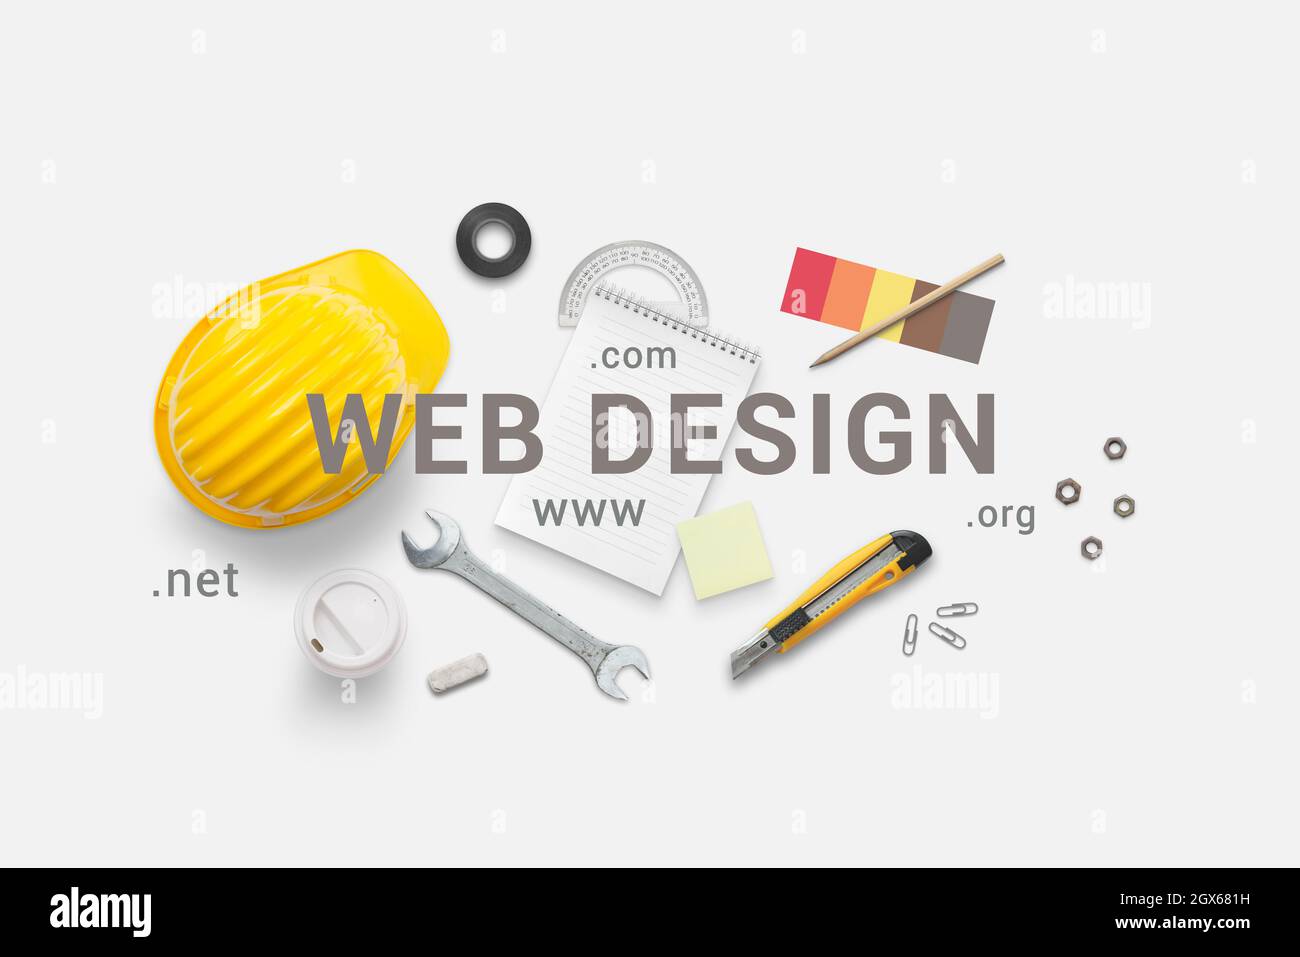 Web design composition with construction tools. Top view, flat lay composition. Under construction concept Stock Photo